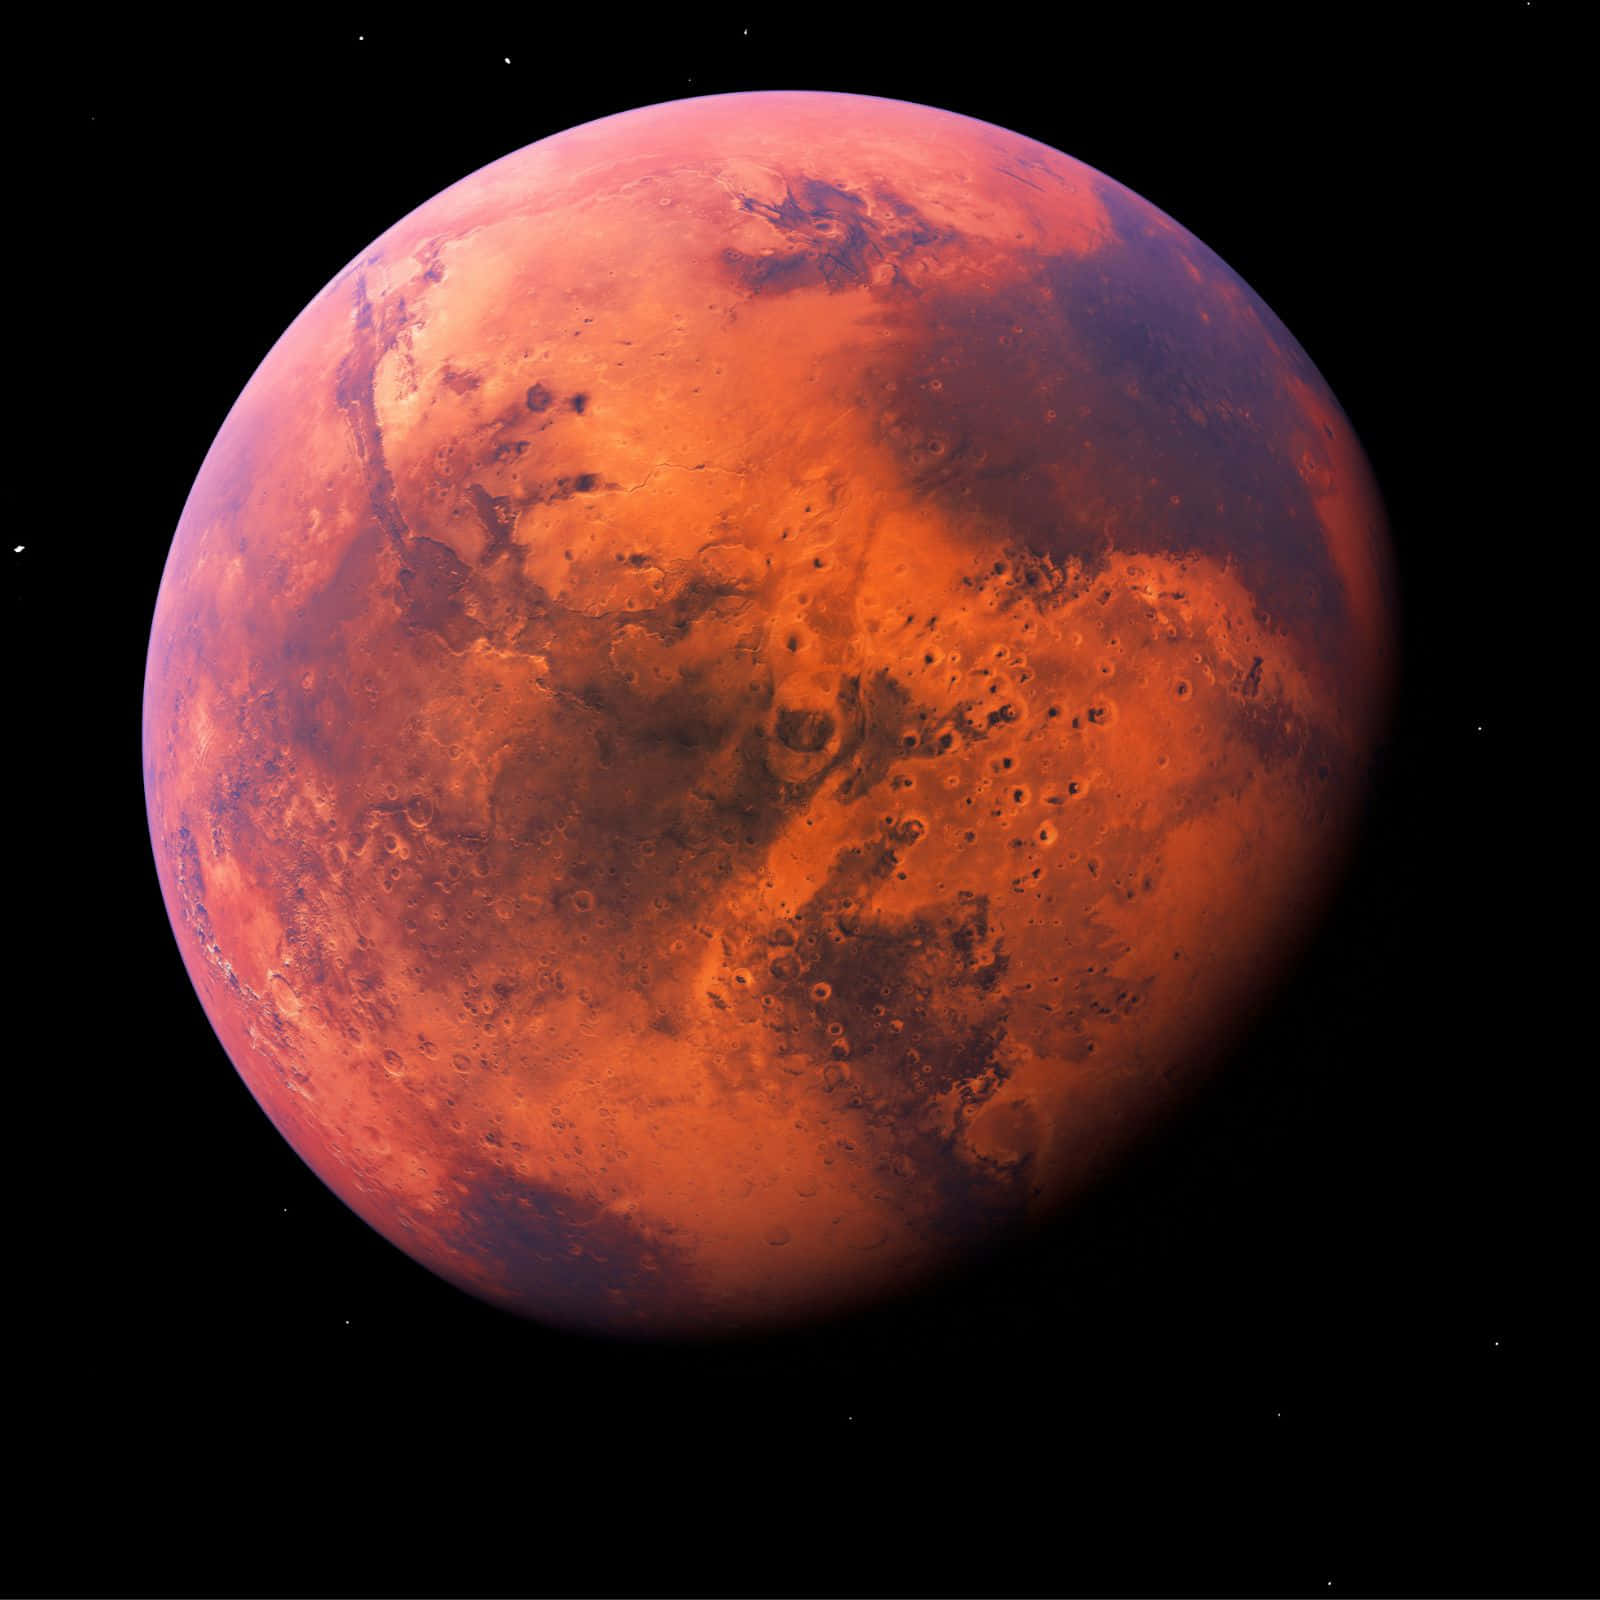 A Detailed View of the Red Planet Mars